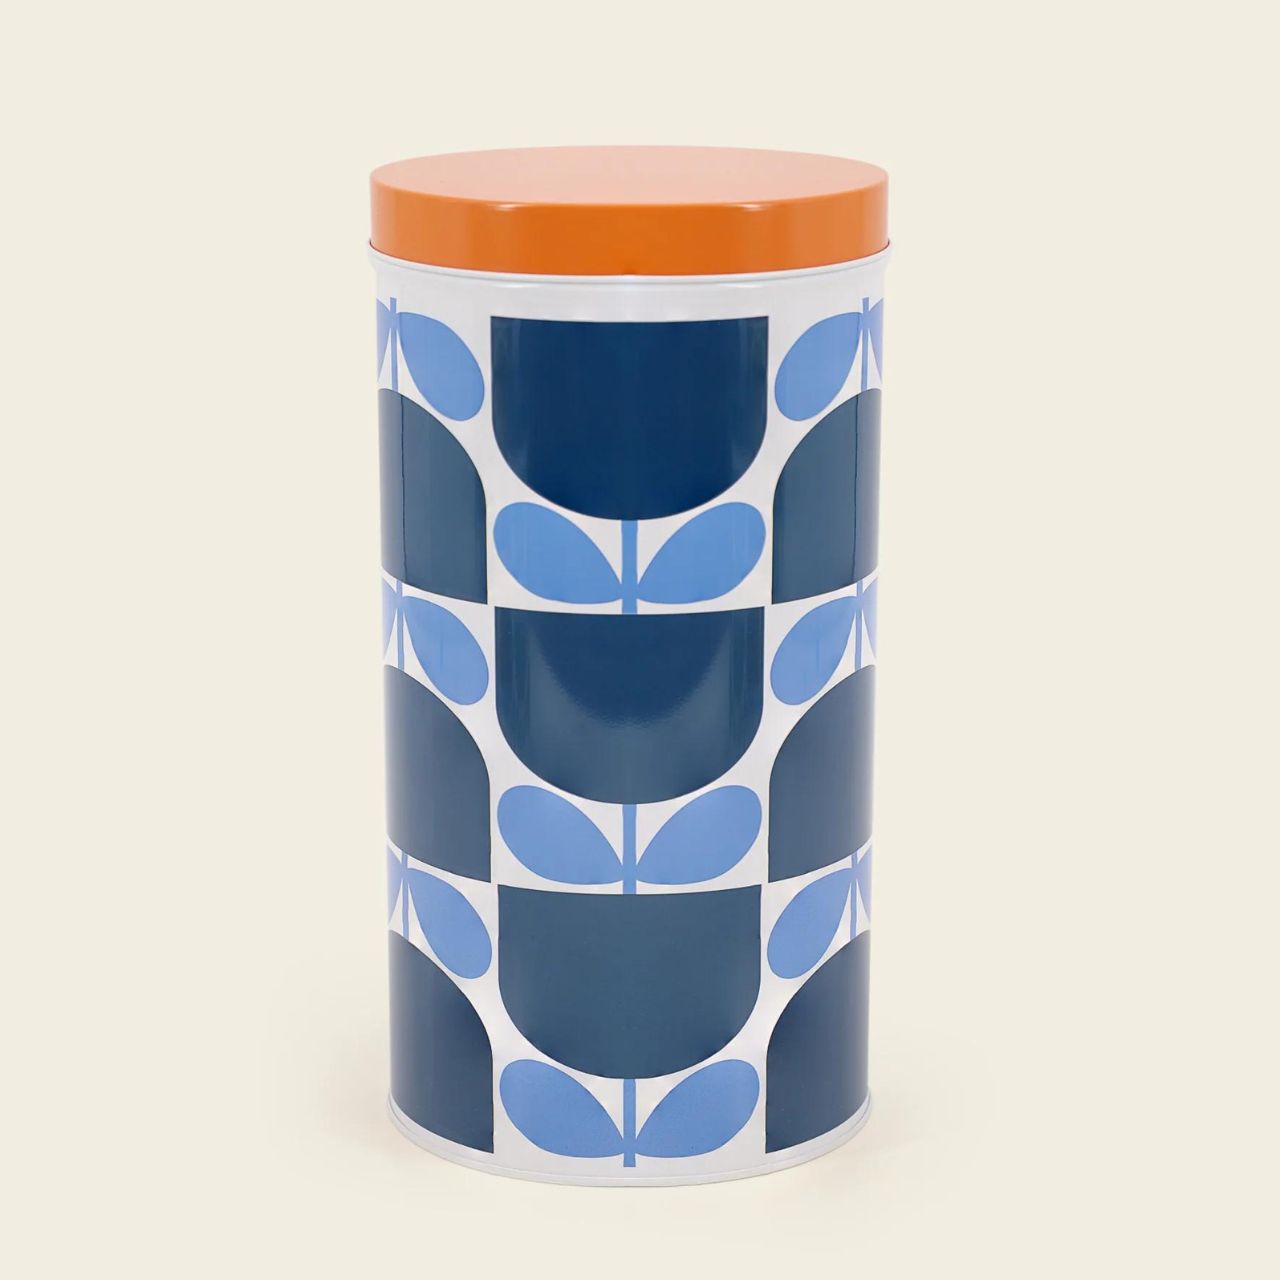 Orla Kiely Nesting Canister Tins - Set of 3 Block Flower  From one the world's top fashion designers Orla Kiely, comes these set of three metal storage canisters in her Block Flower design. A great addition to any kitchen counter top with their bright and so recognisable colour pallet.